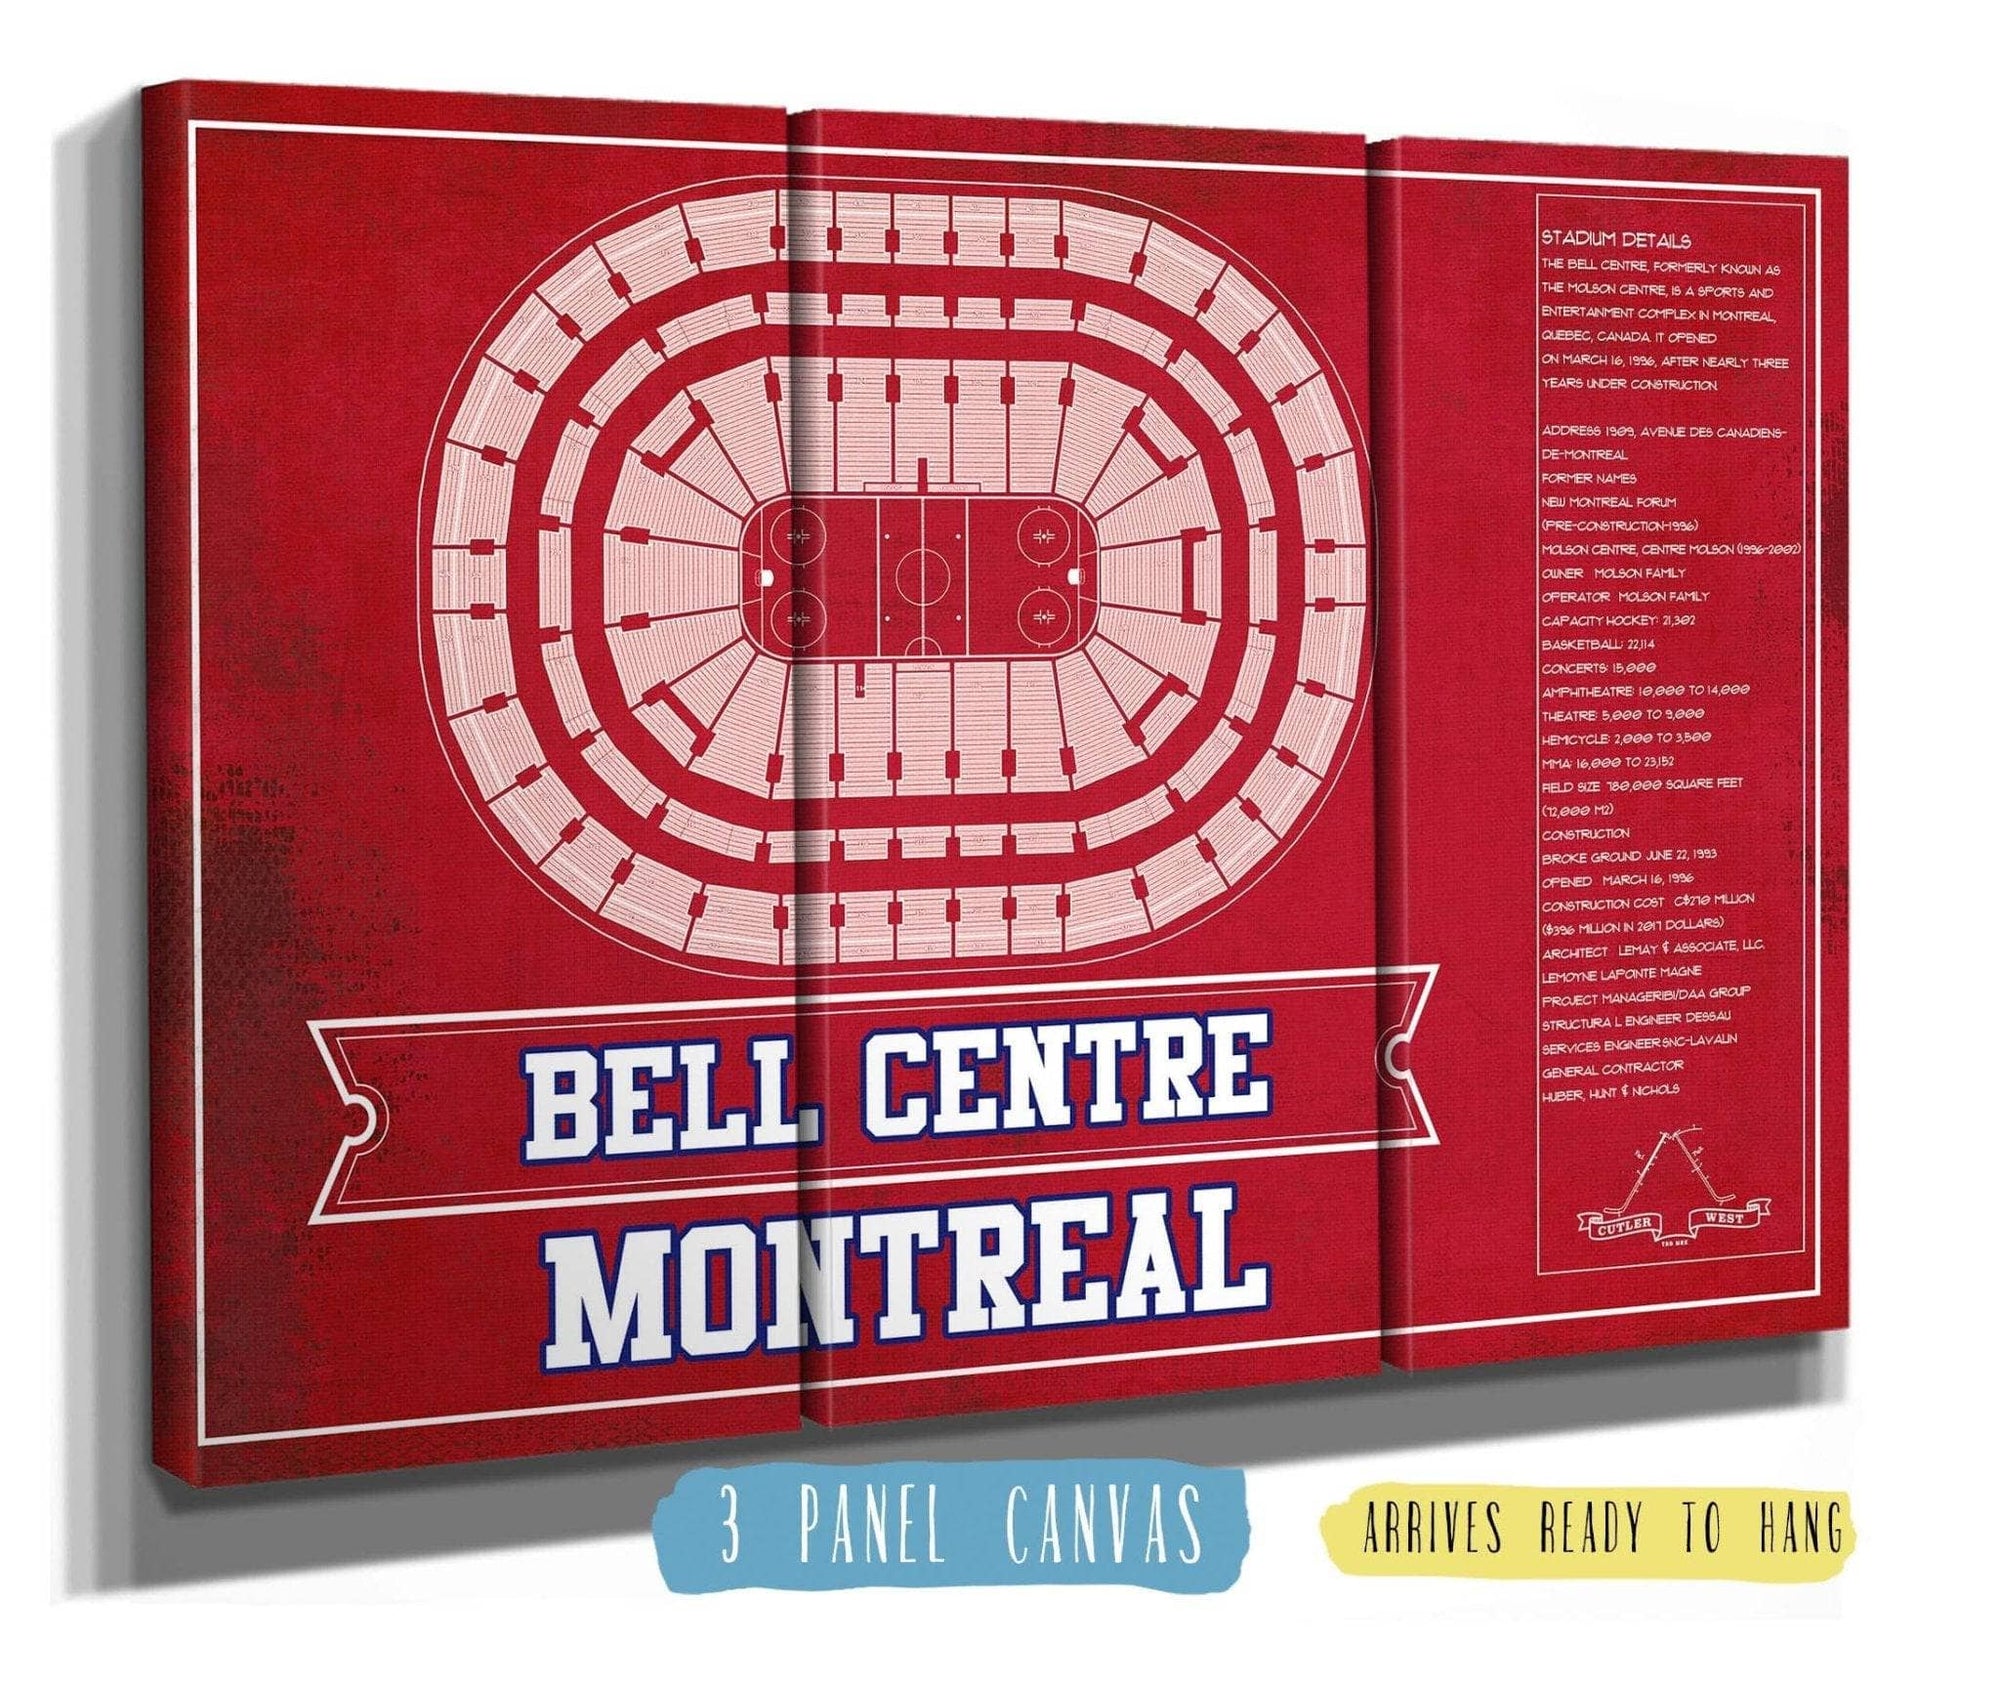 Cutler West 48" x 32" / 3 Panel Canvas Wrap Montreal Canadiens Bell Centre Seating Chart - Vintage Hockey Team Color Print 673822723-TEAM